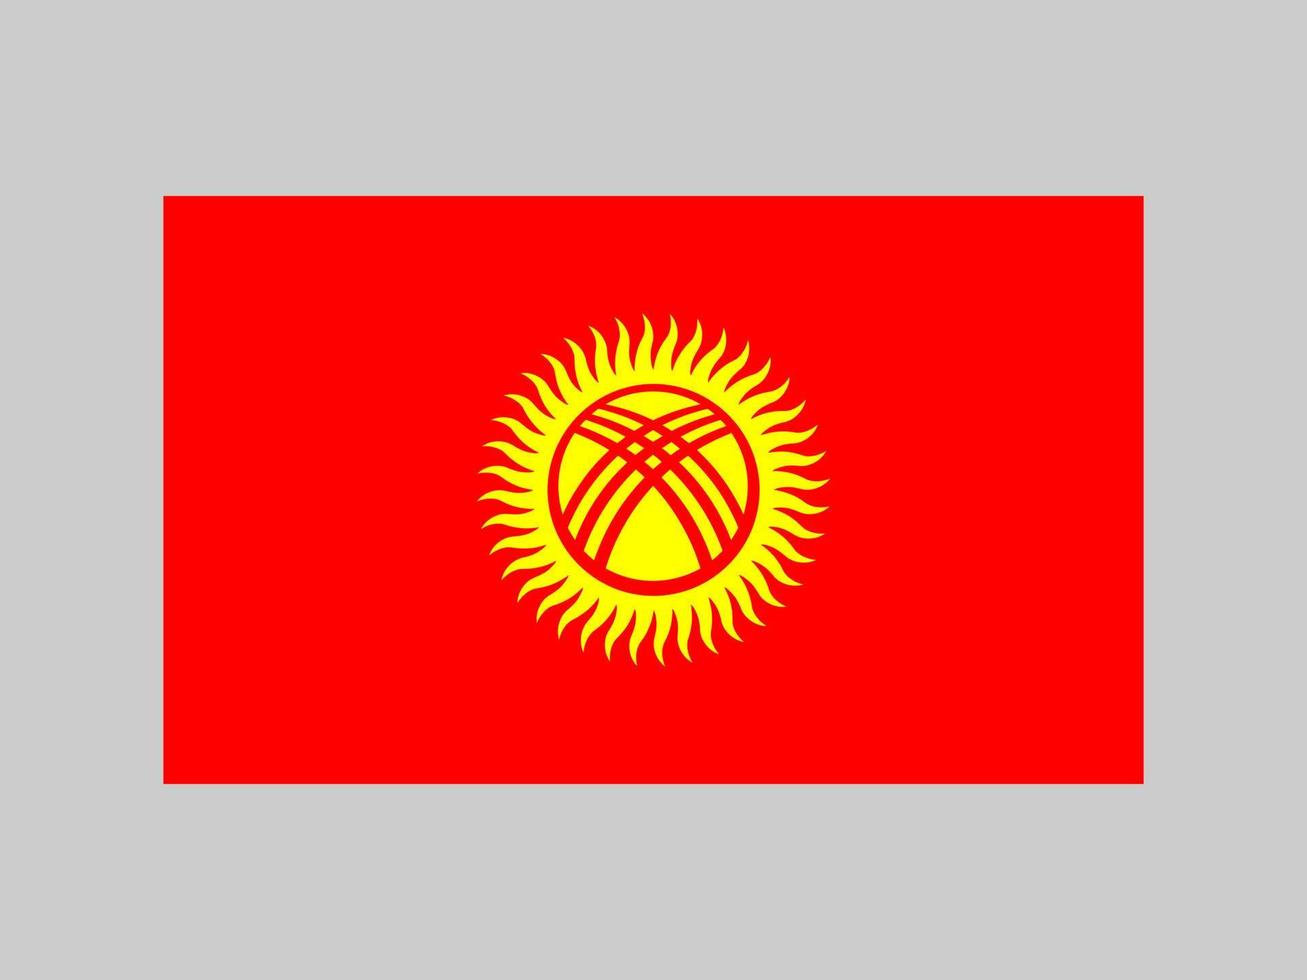 Kyrgyzstan flag, official colors and proportion. Vector illustration.